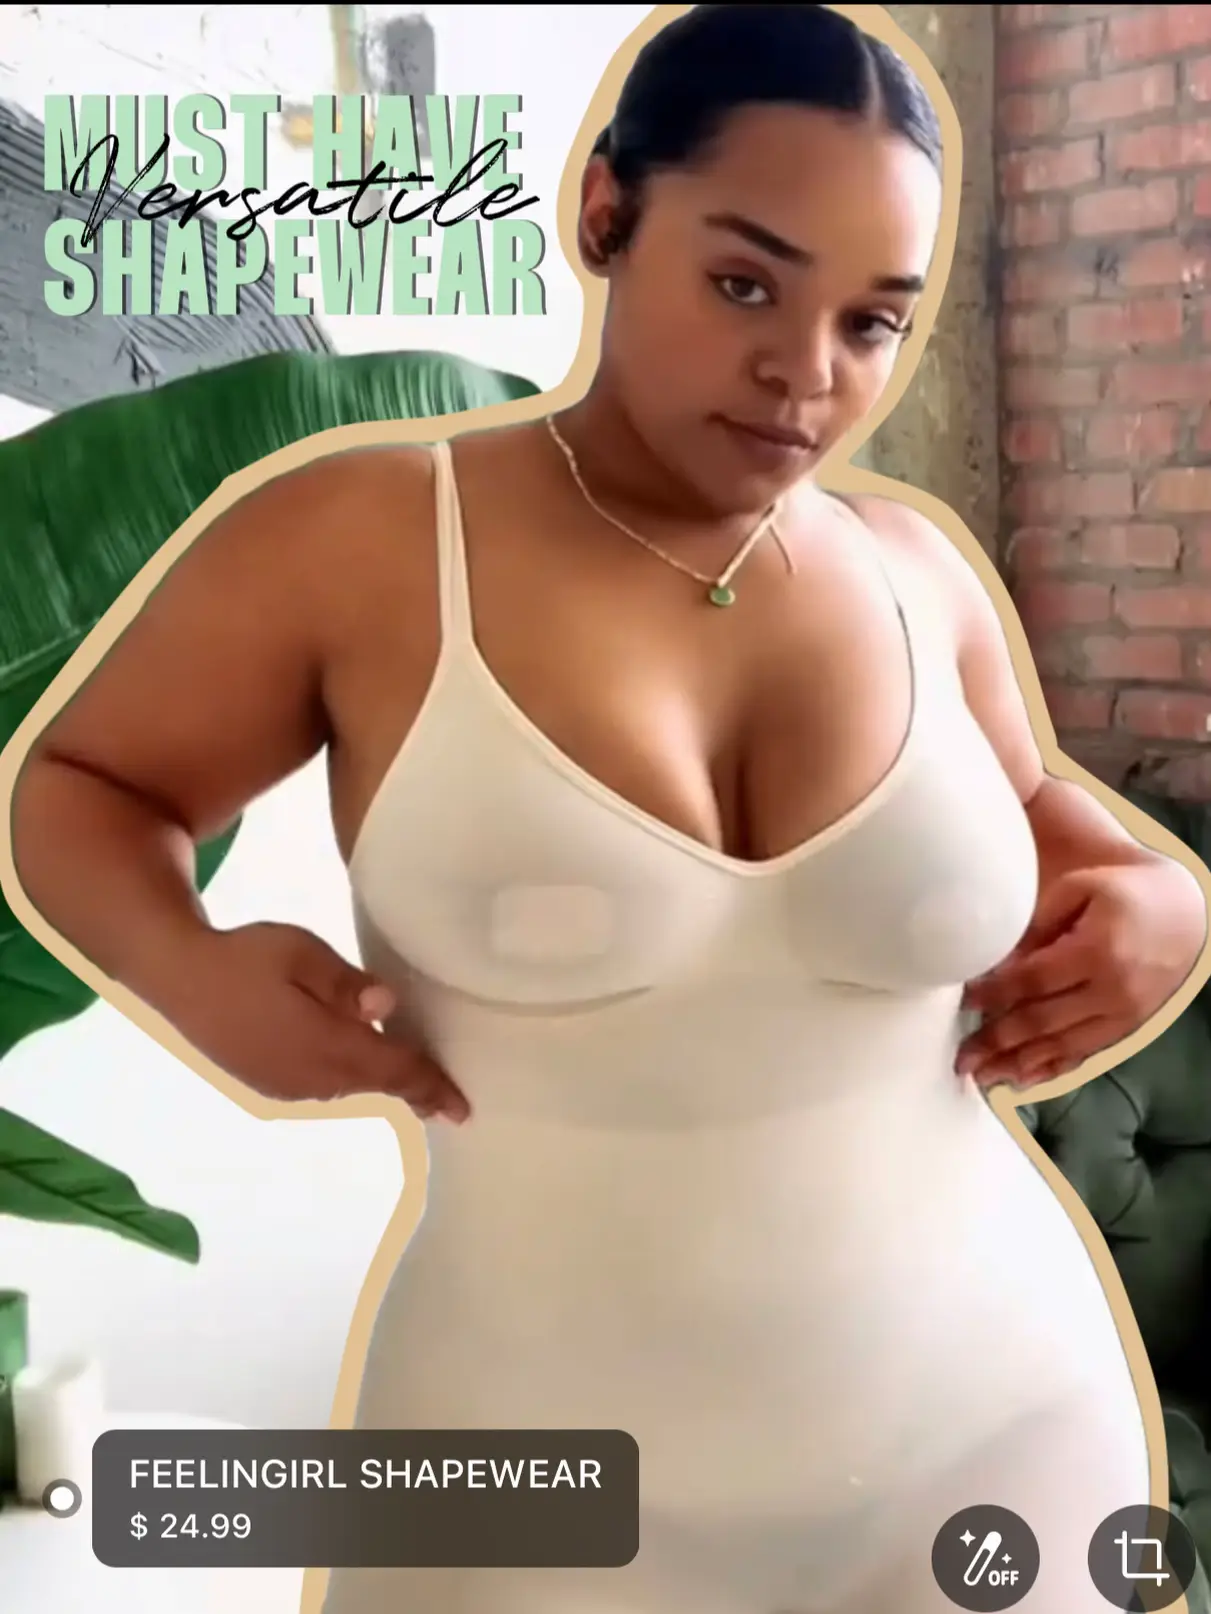 THE MOST COMFY SHAPEWEAR SHORTS, Video published by A S t o r m W